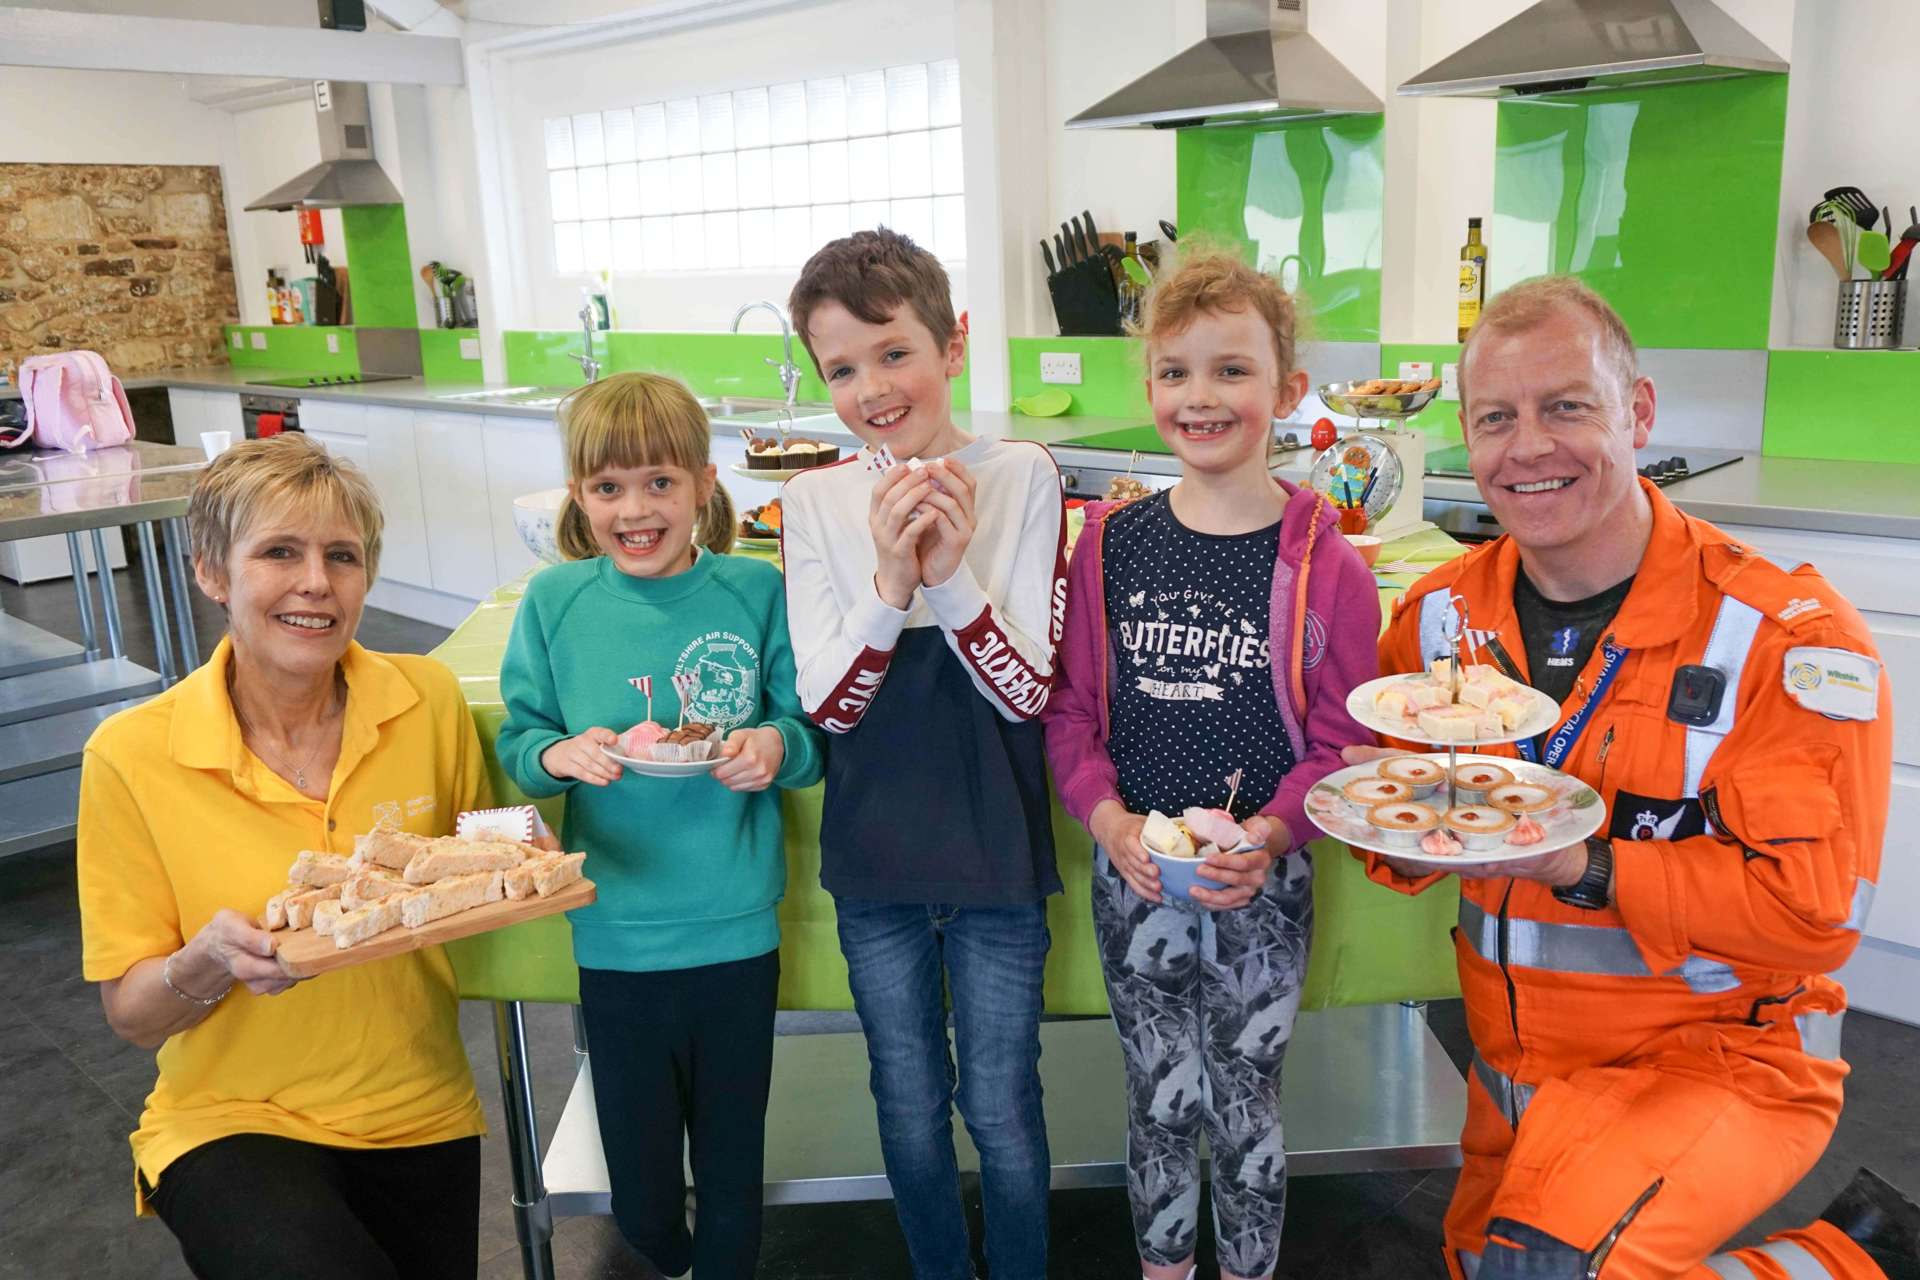 A group photo taken in a professional kitchen with children holding cakes alongside staff and critical care paramedic.